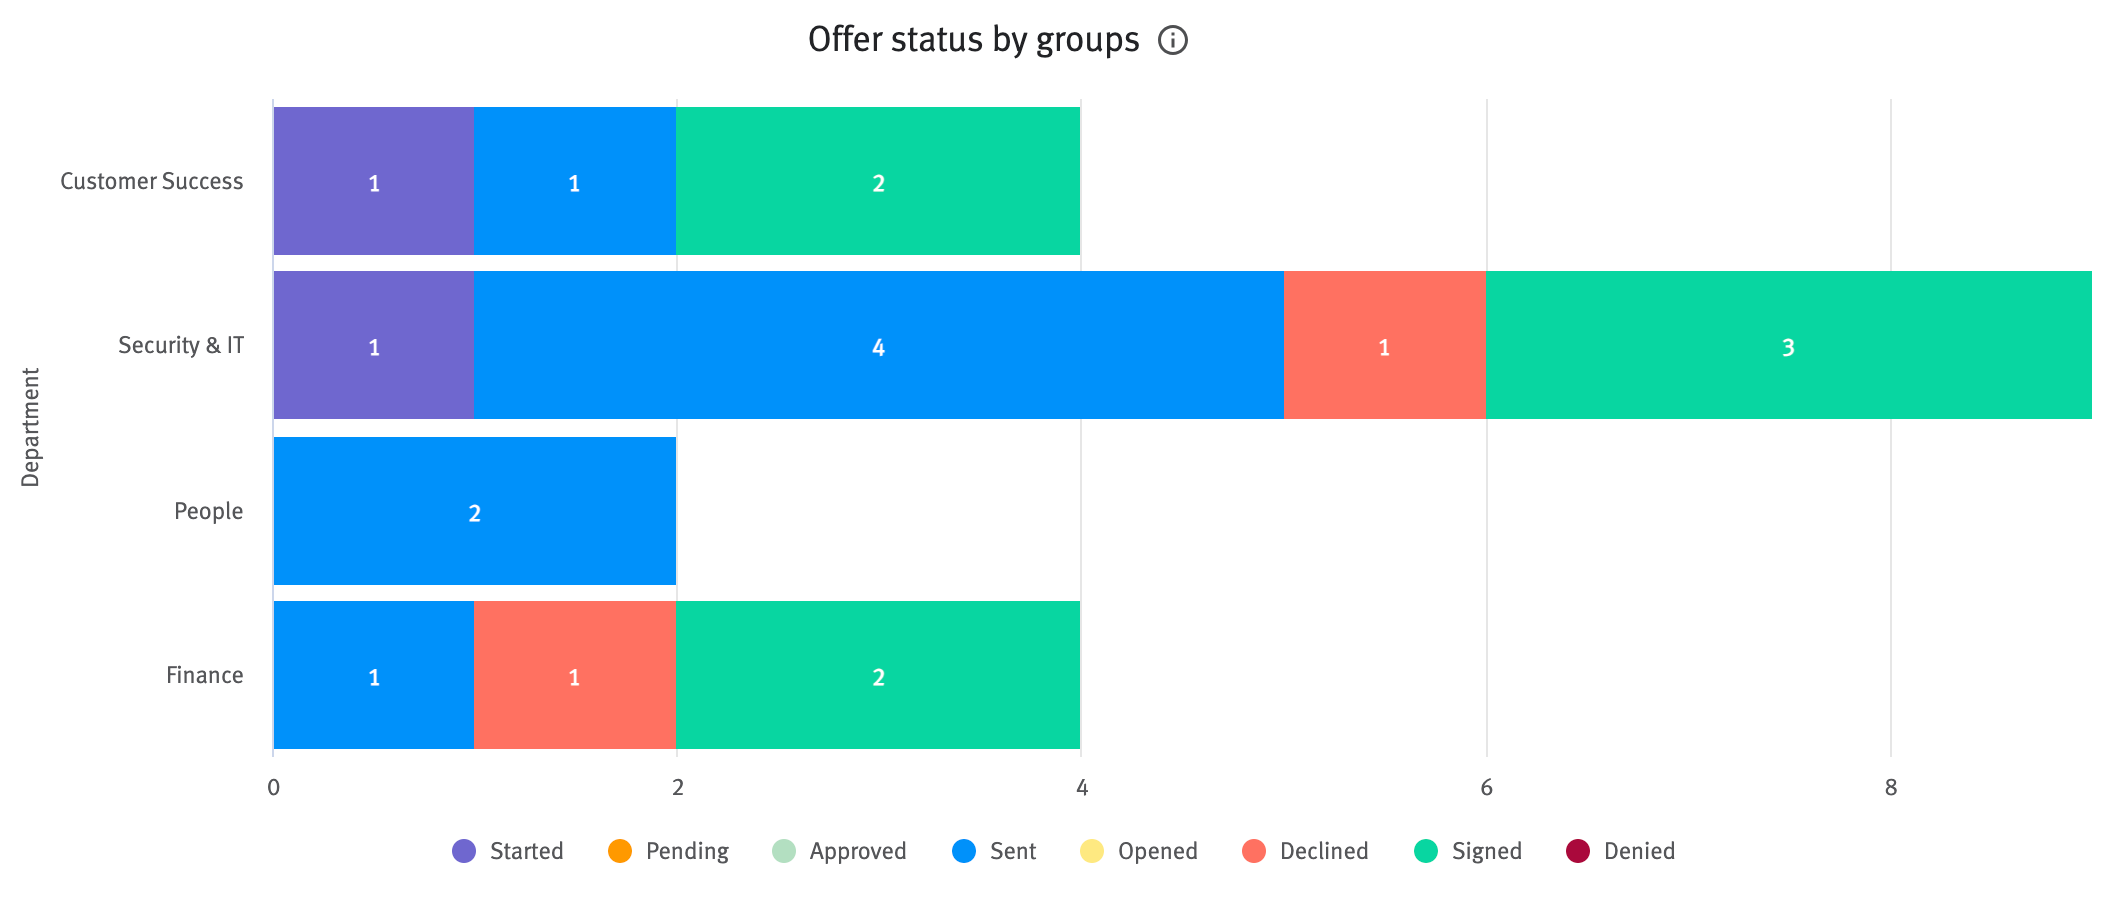 Offer status by groups chart